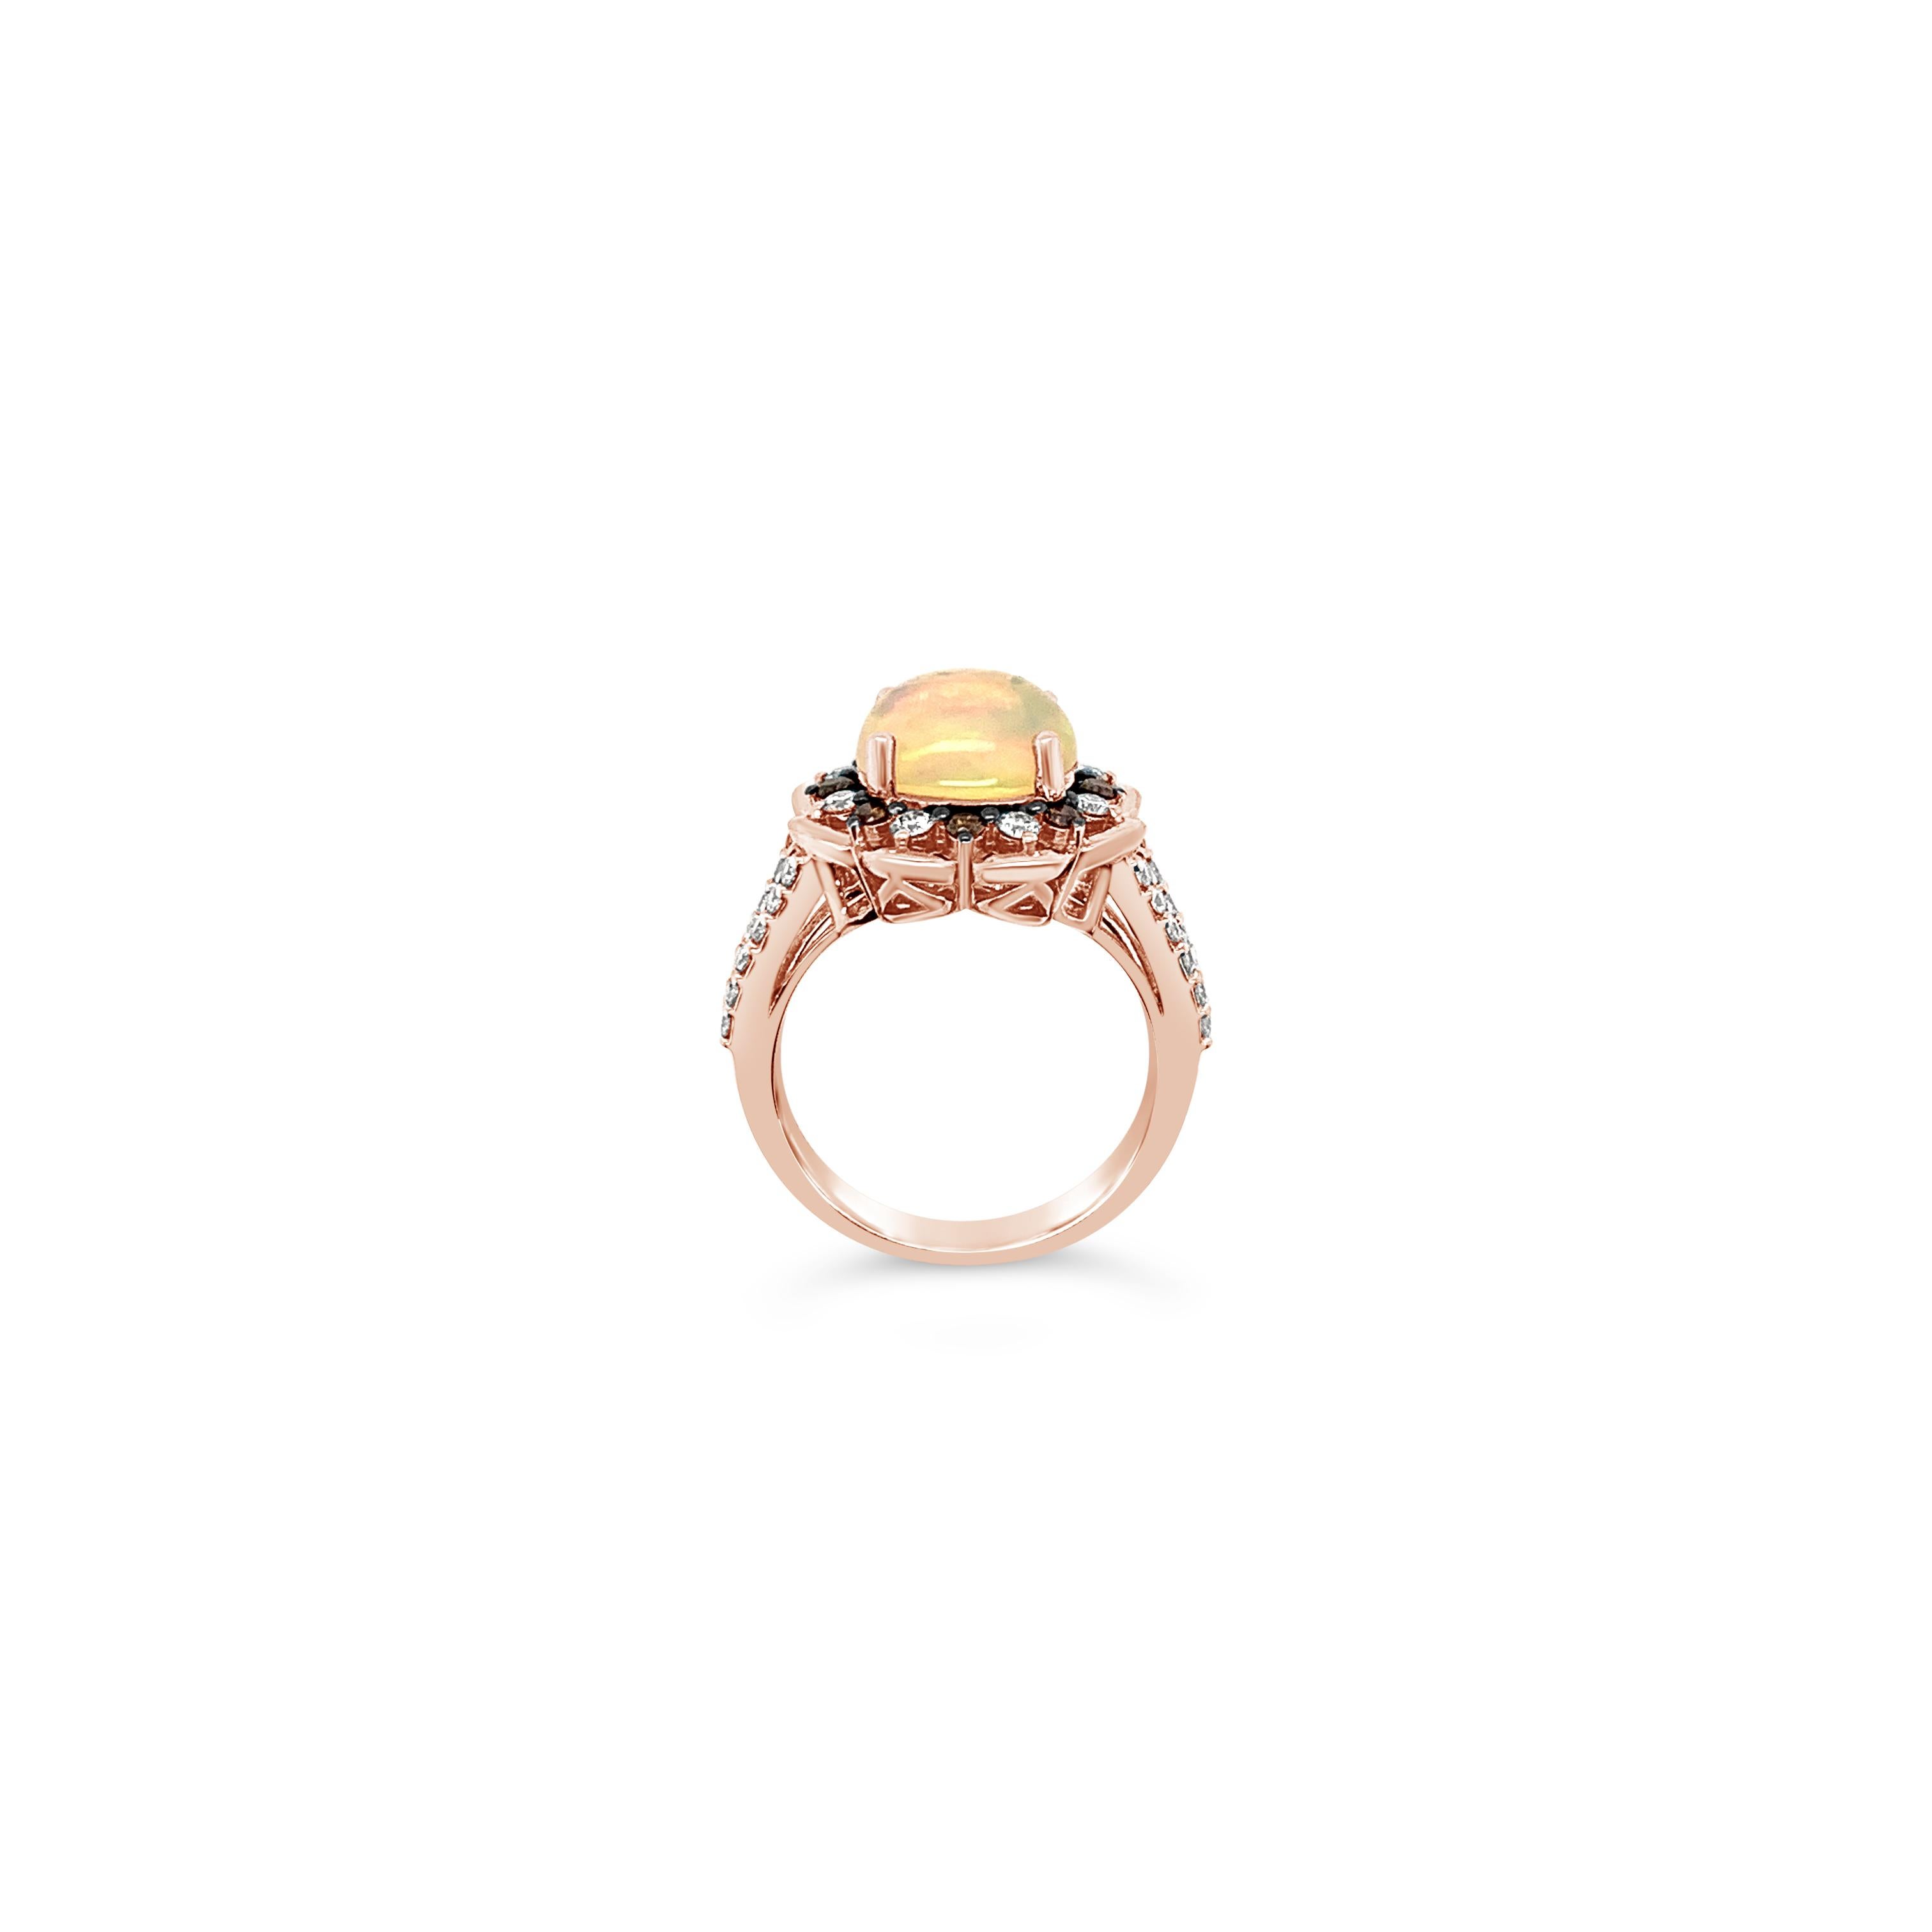 Le Vian Creme Brulee® Ring featuring 1.90 cts. Neopolitan Opal, 0.60 cts. Nude Diamonds, 0.17 cts. Chocolate Diamonds® set in 14K Strawberry Gold®

Diamonds Breakdown:
.60 cts Nude Diamonds
.17 cts Brown Diamonds

Gems Breakdown:
1.90 cts Opal

Ring